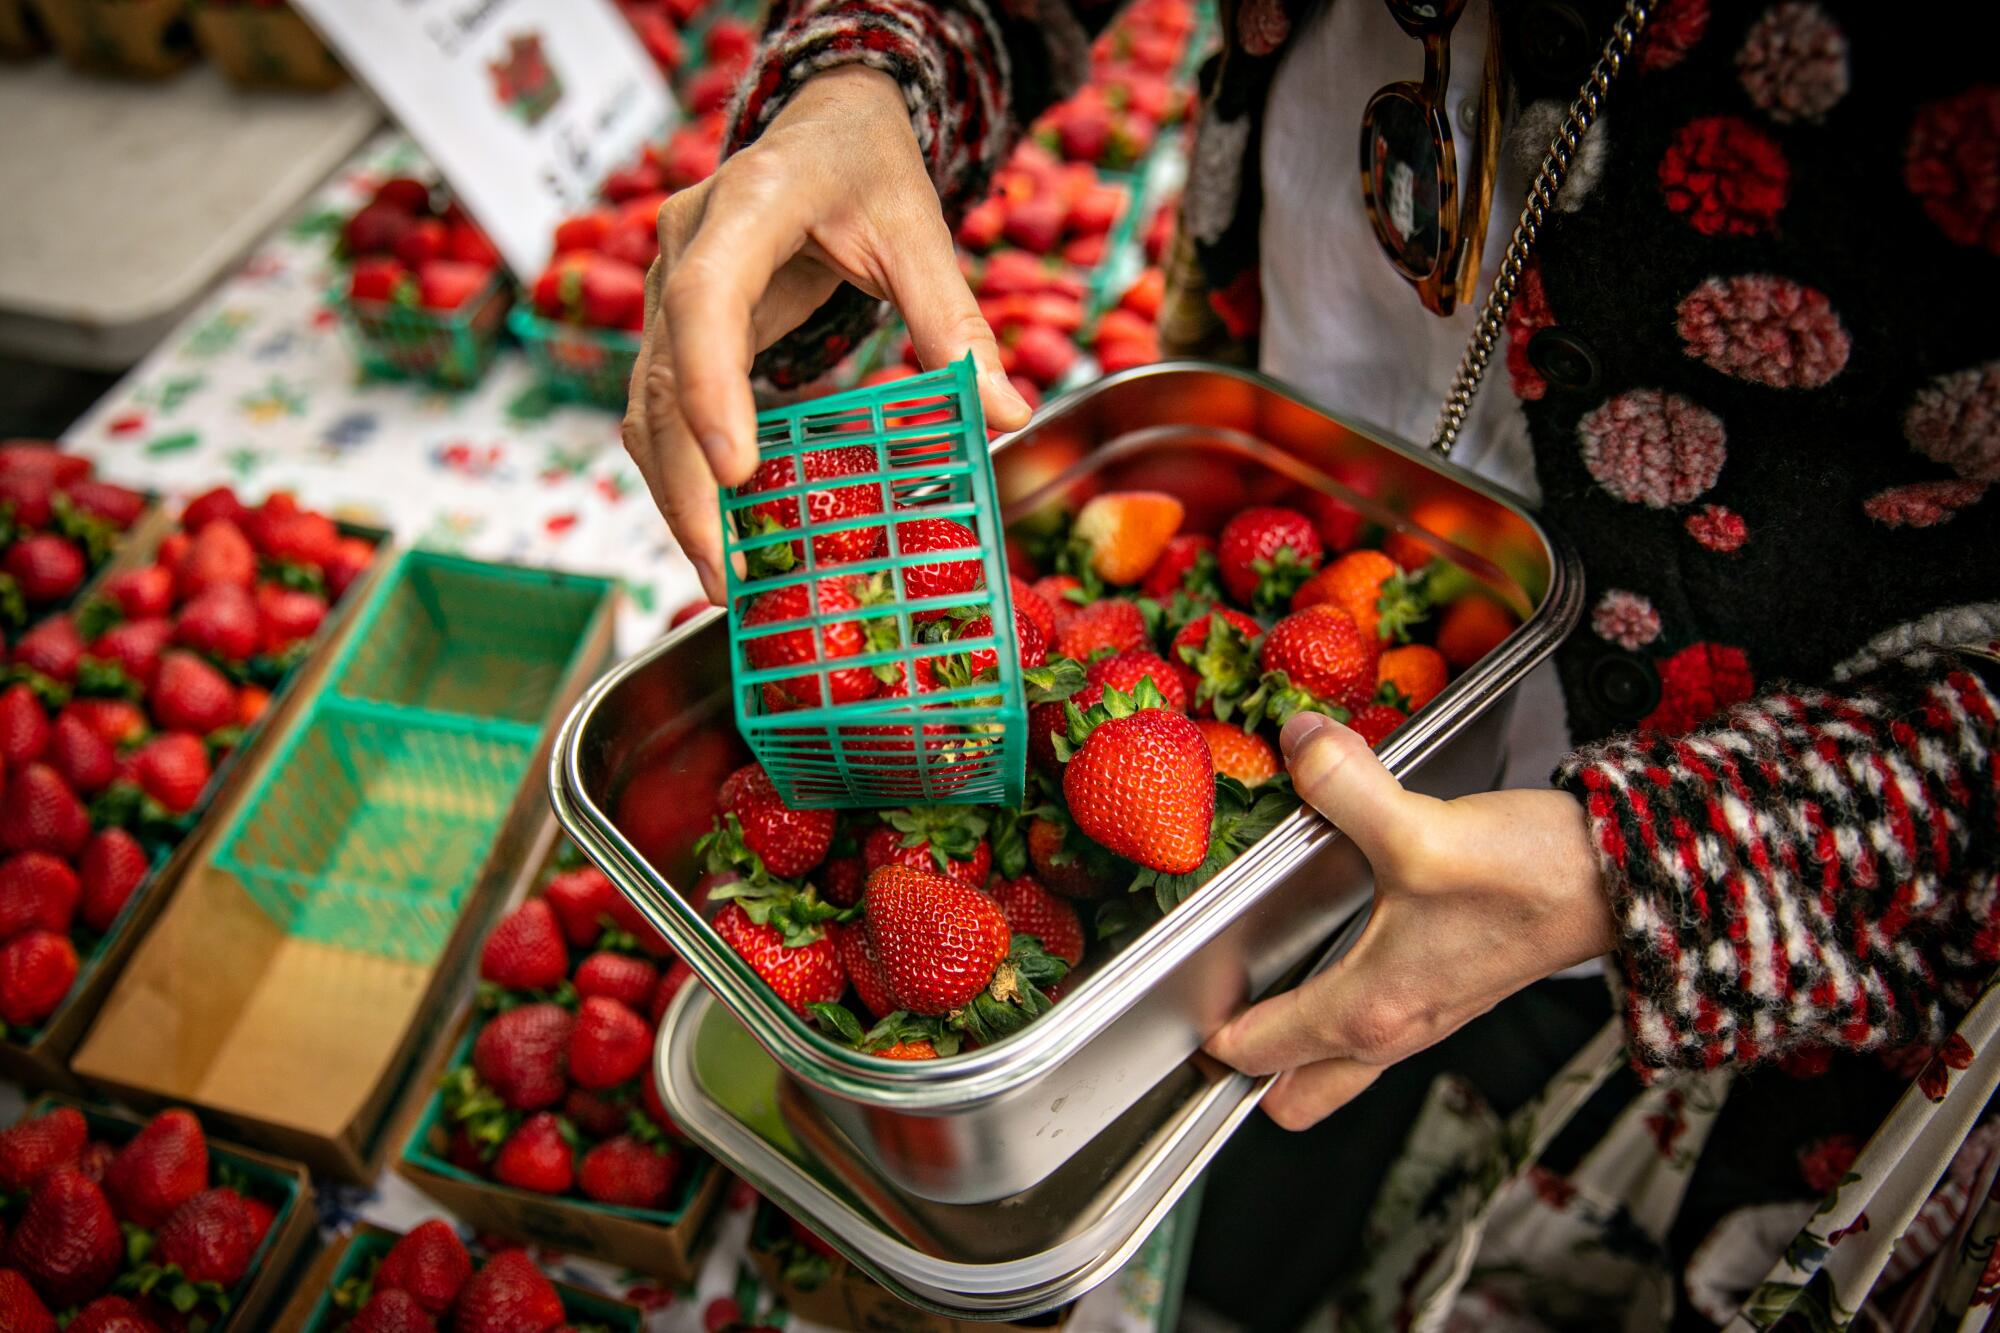 Hands pouring strawberries from a plastic green basket into a metal container.